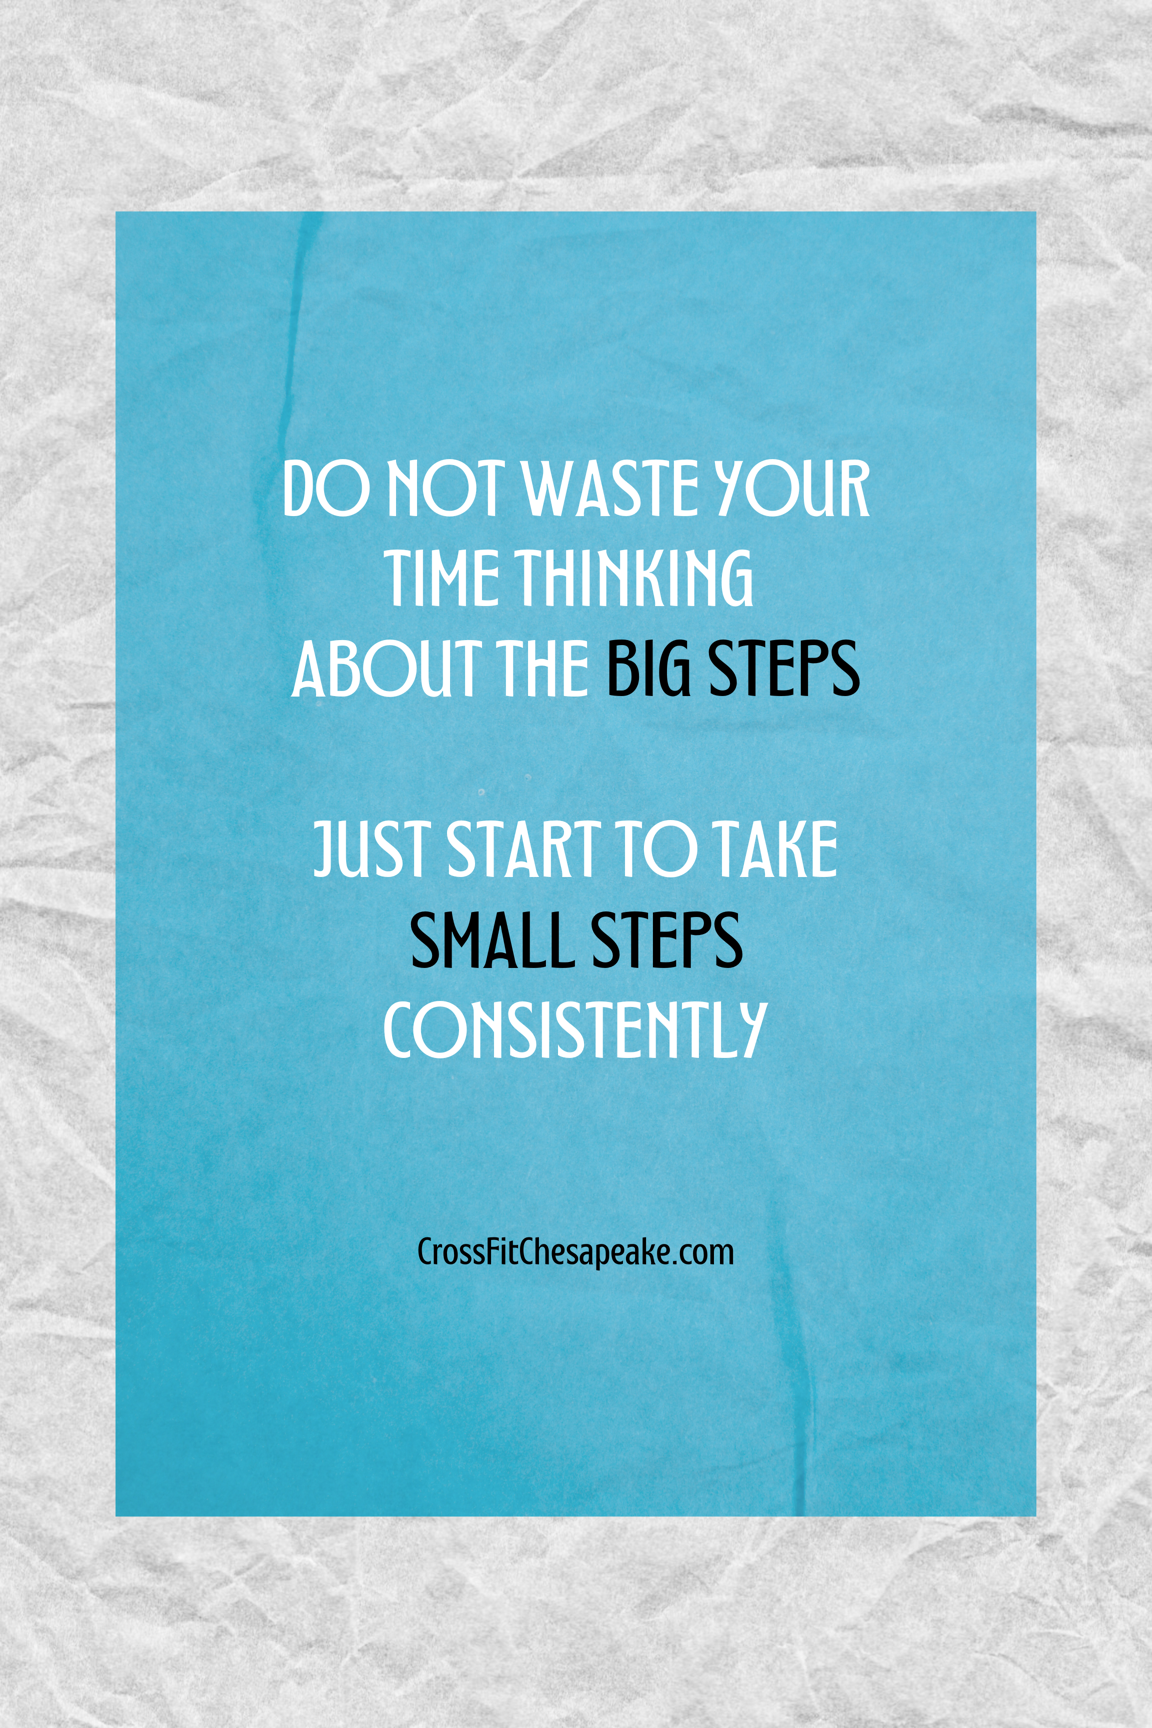 Be Consistent…It Will Pay Off